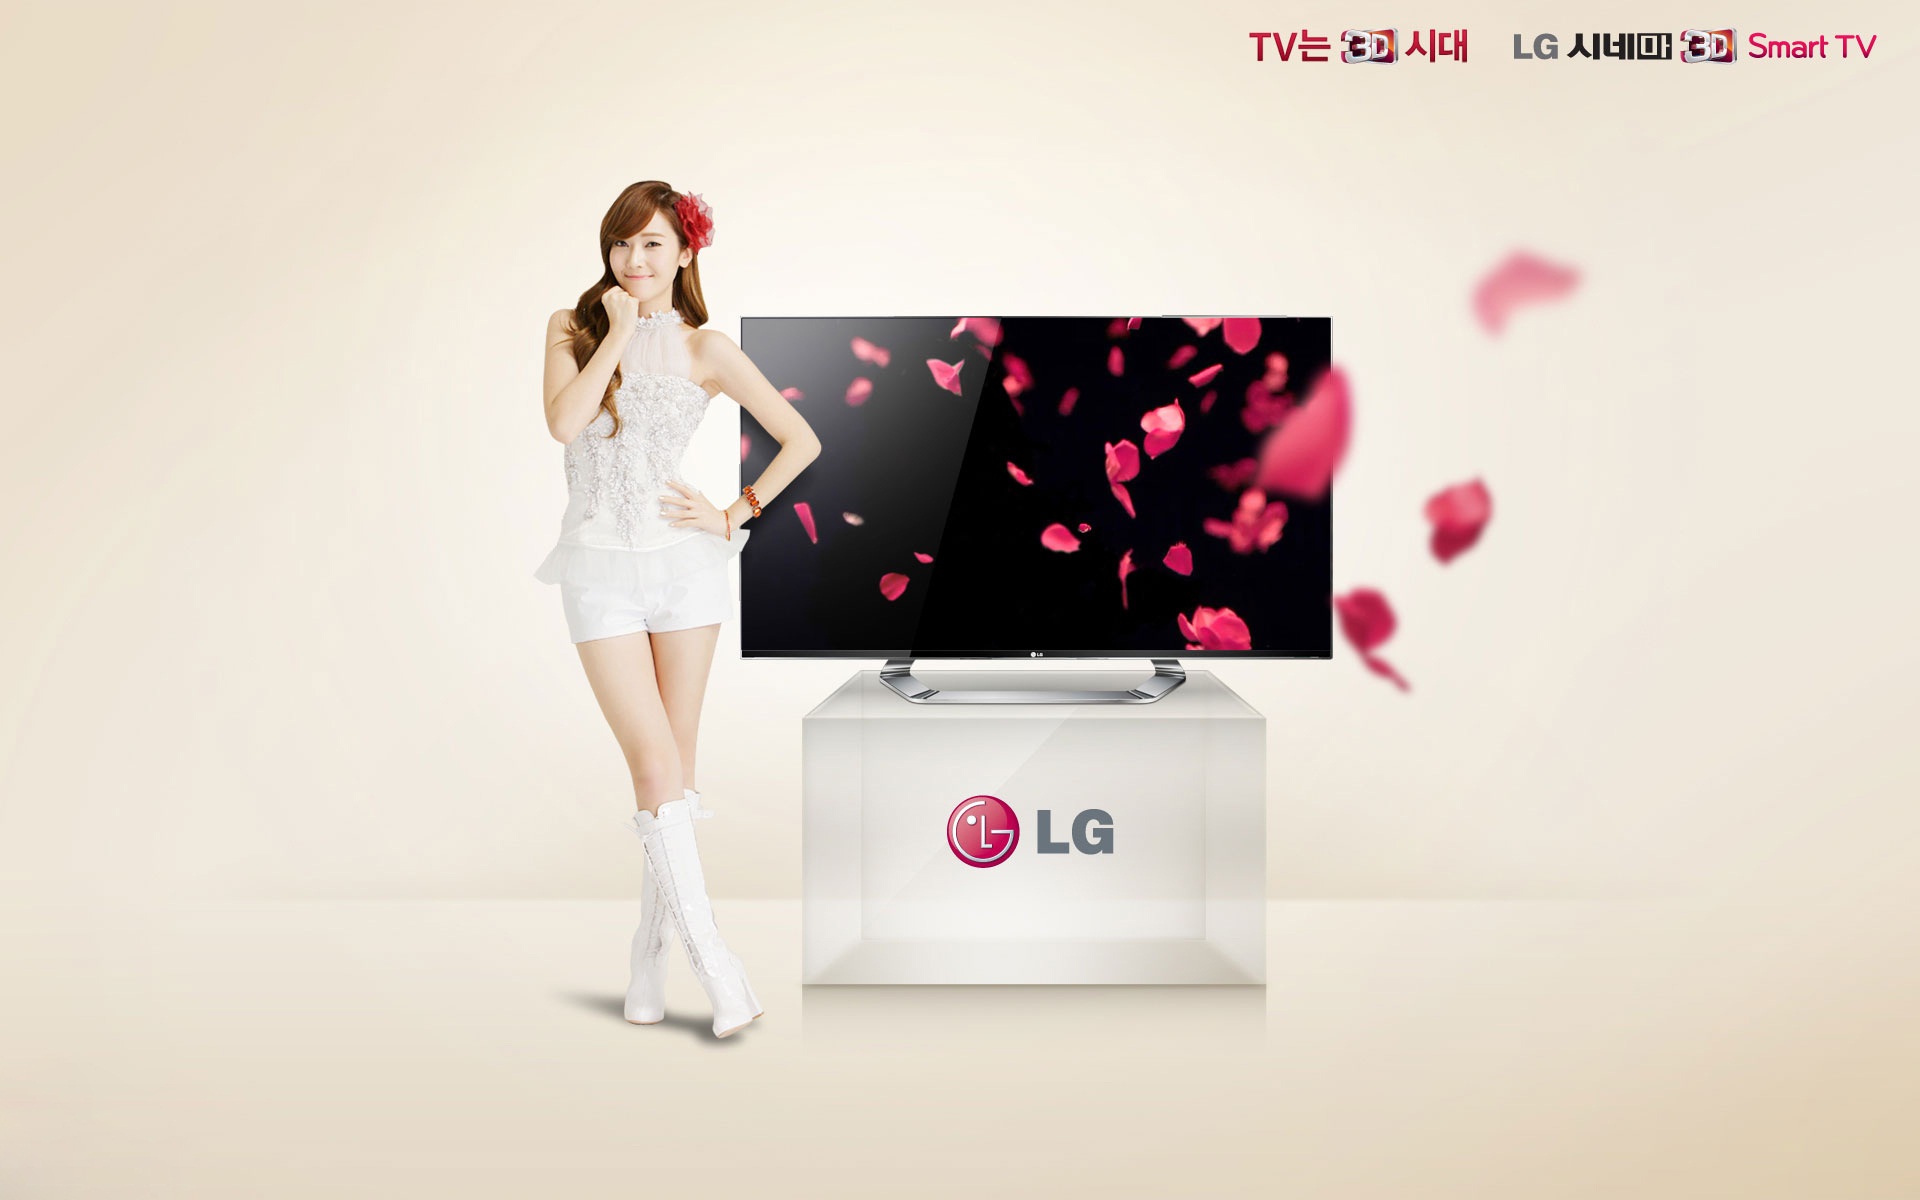 Girls Generation ACE and LG endorsements ads HD wallpapers #18 - 1920x1200